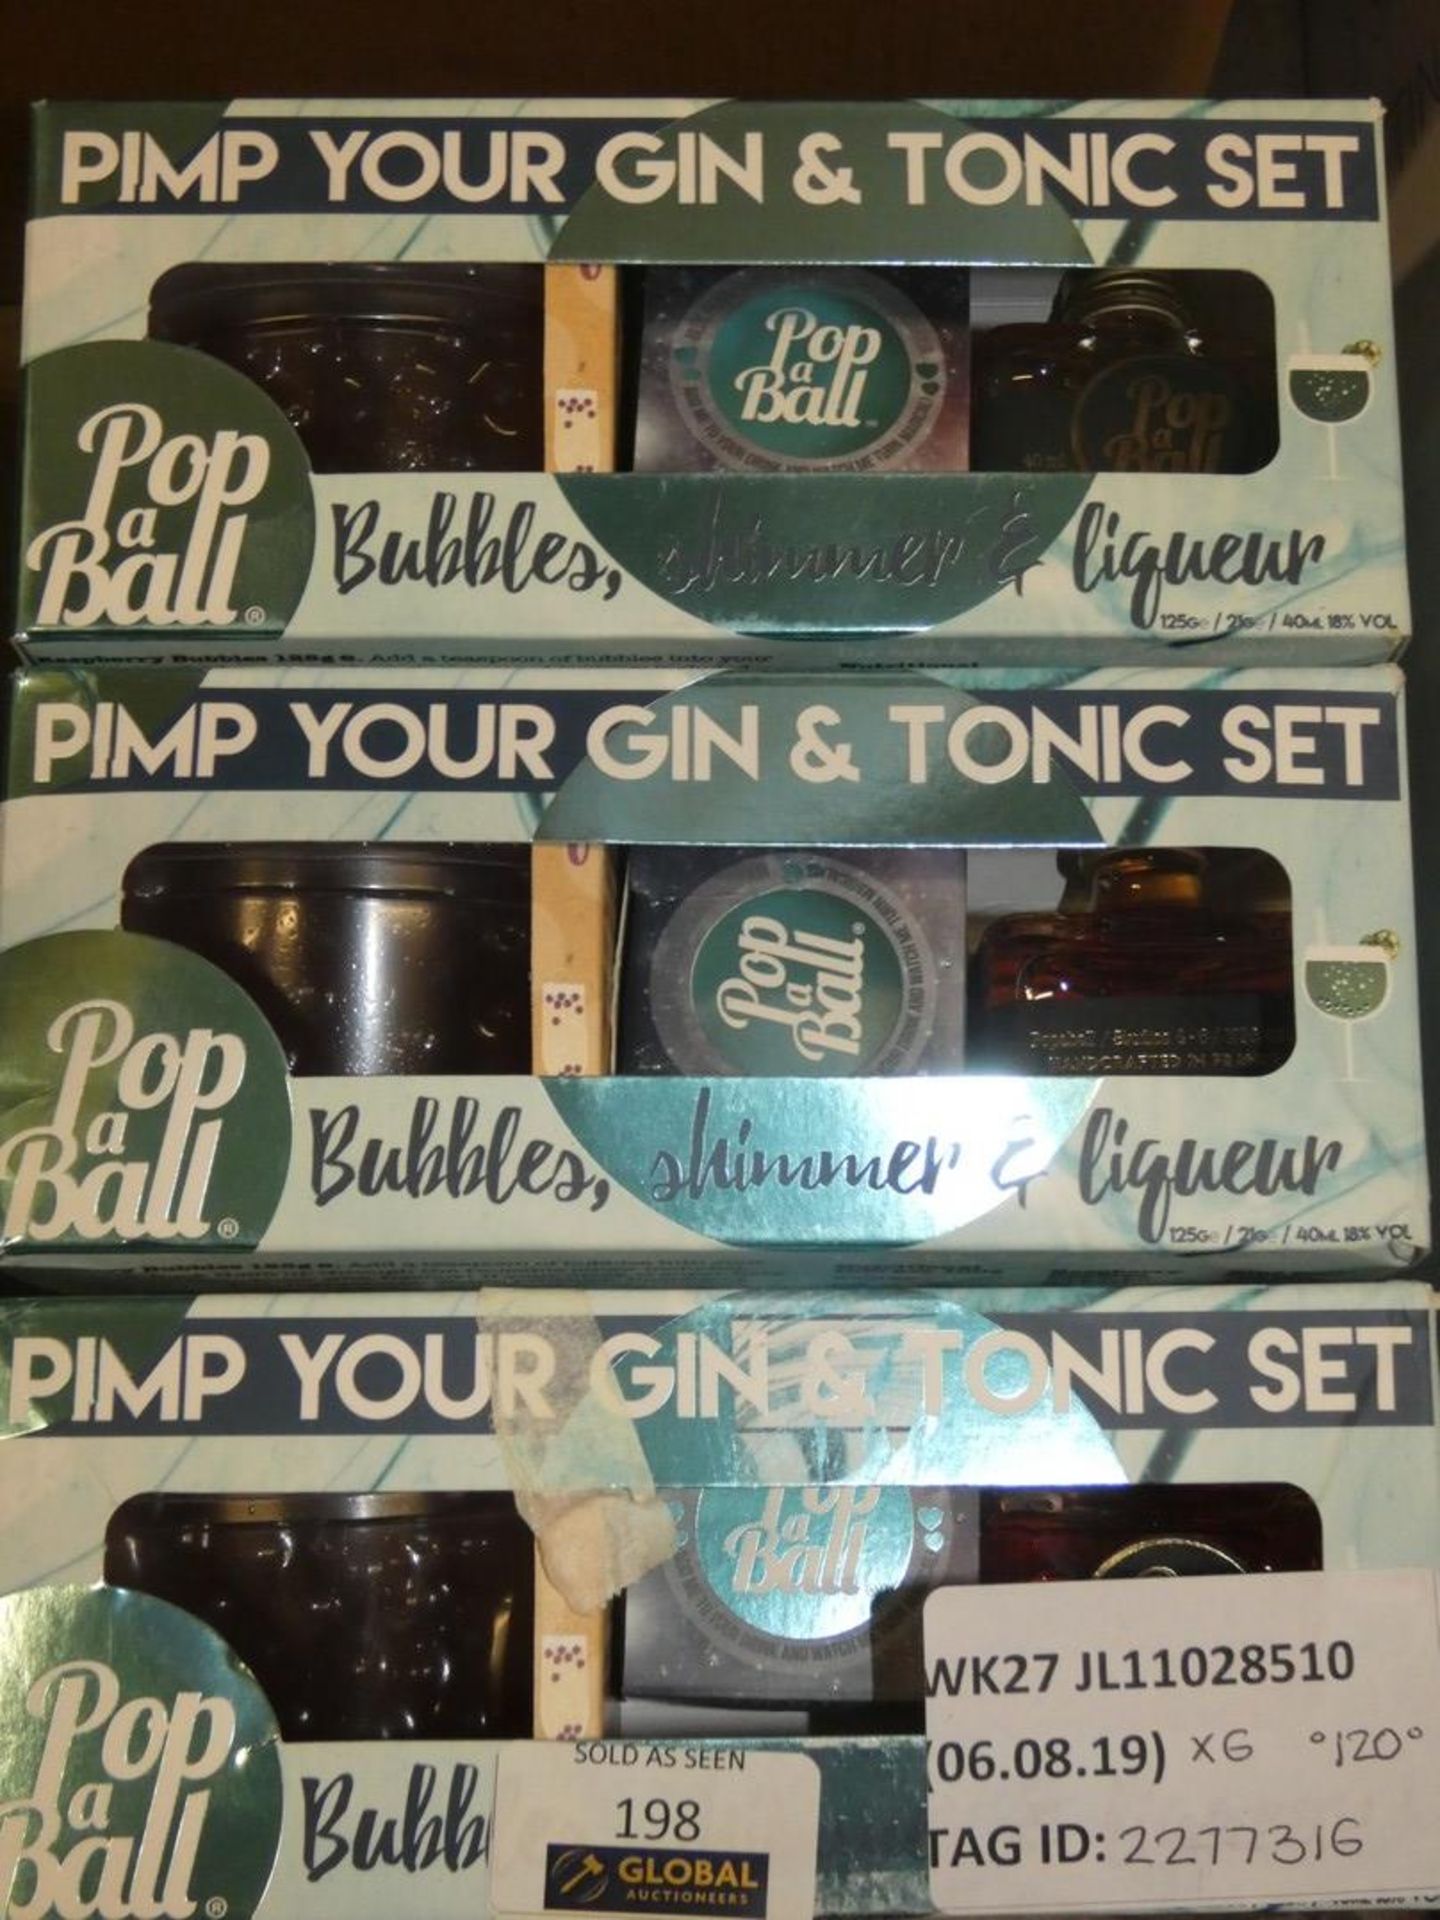 Lot To Contain 6 Pop A Ball Gin And Tonic Gift Sets Combined RRP £120 (2271316) (Viewings And